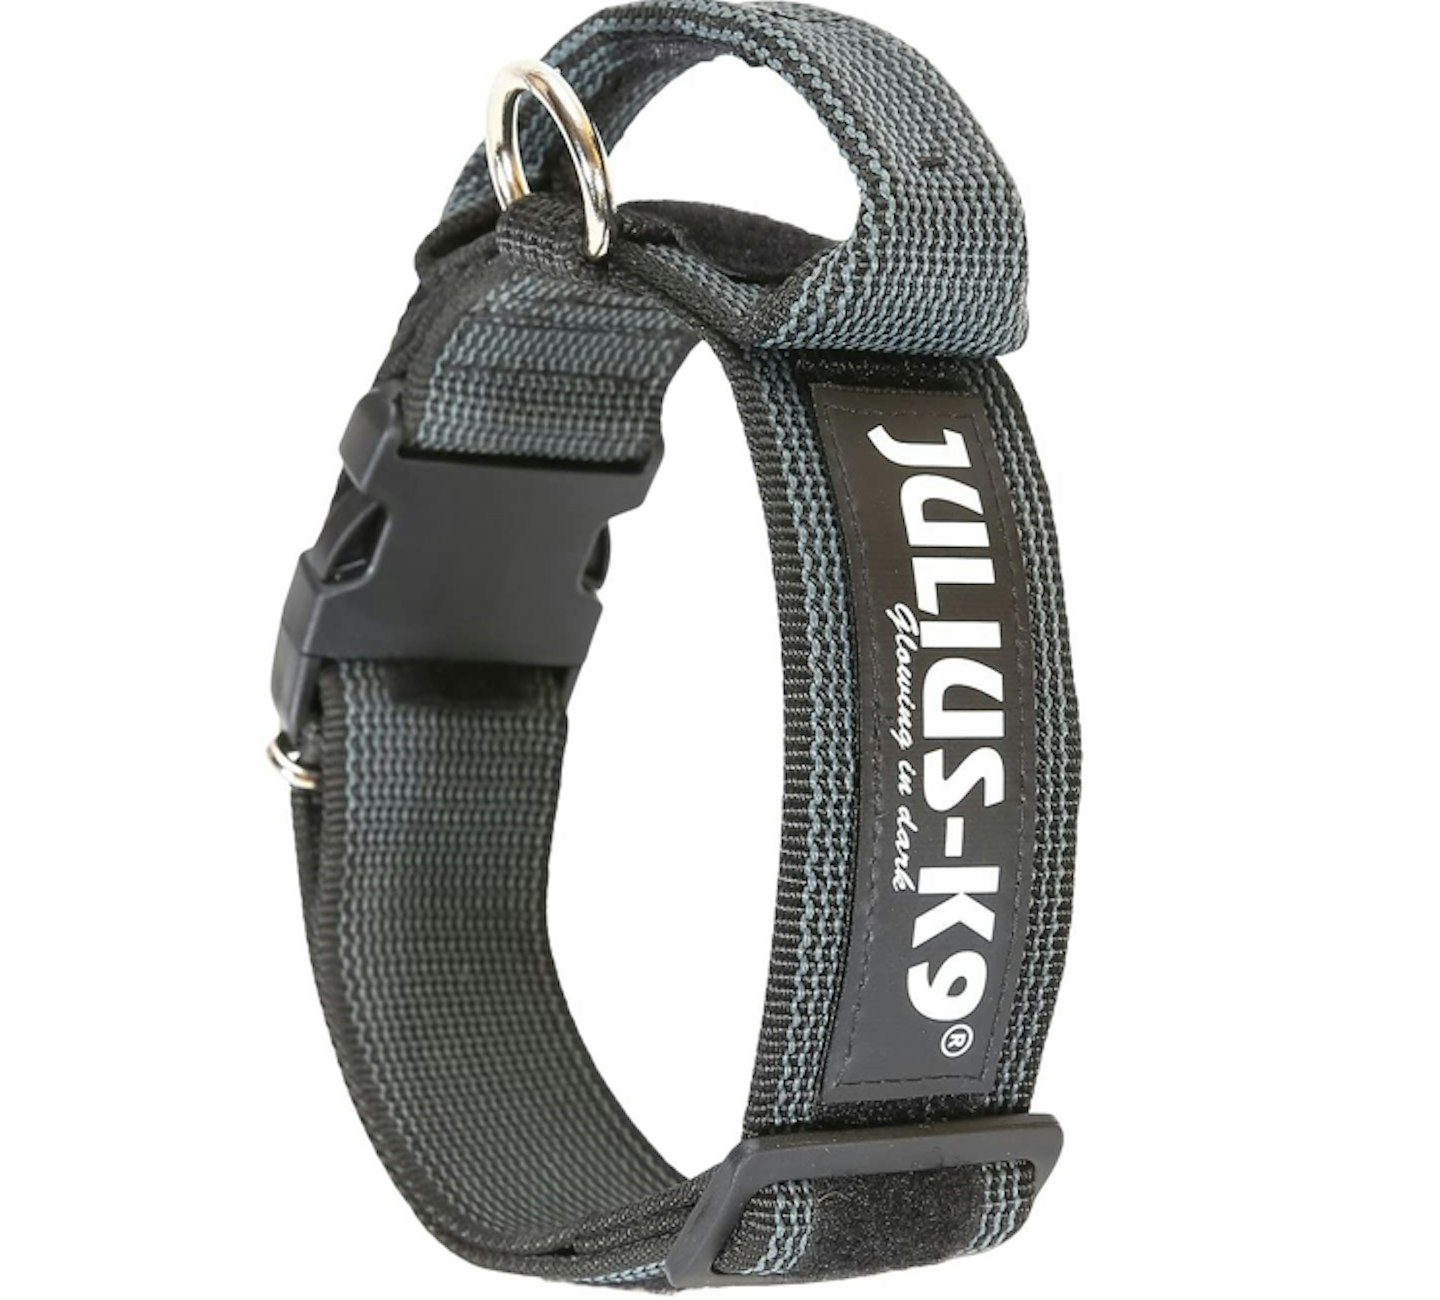 Julius-K9 Collar with Handle, Safety Lock and Interchangeable Patch